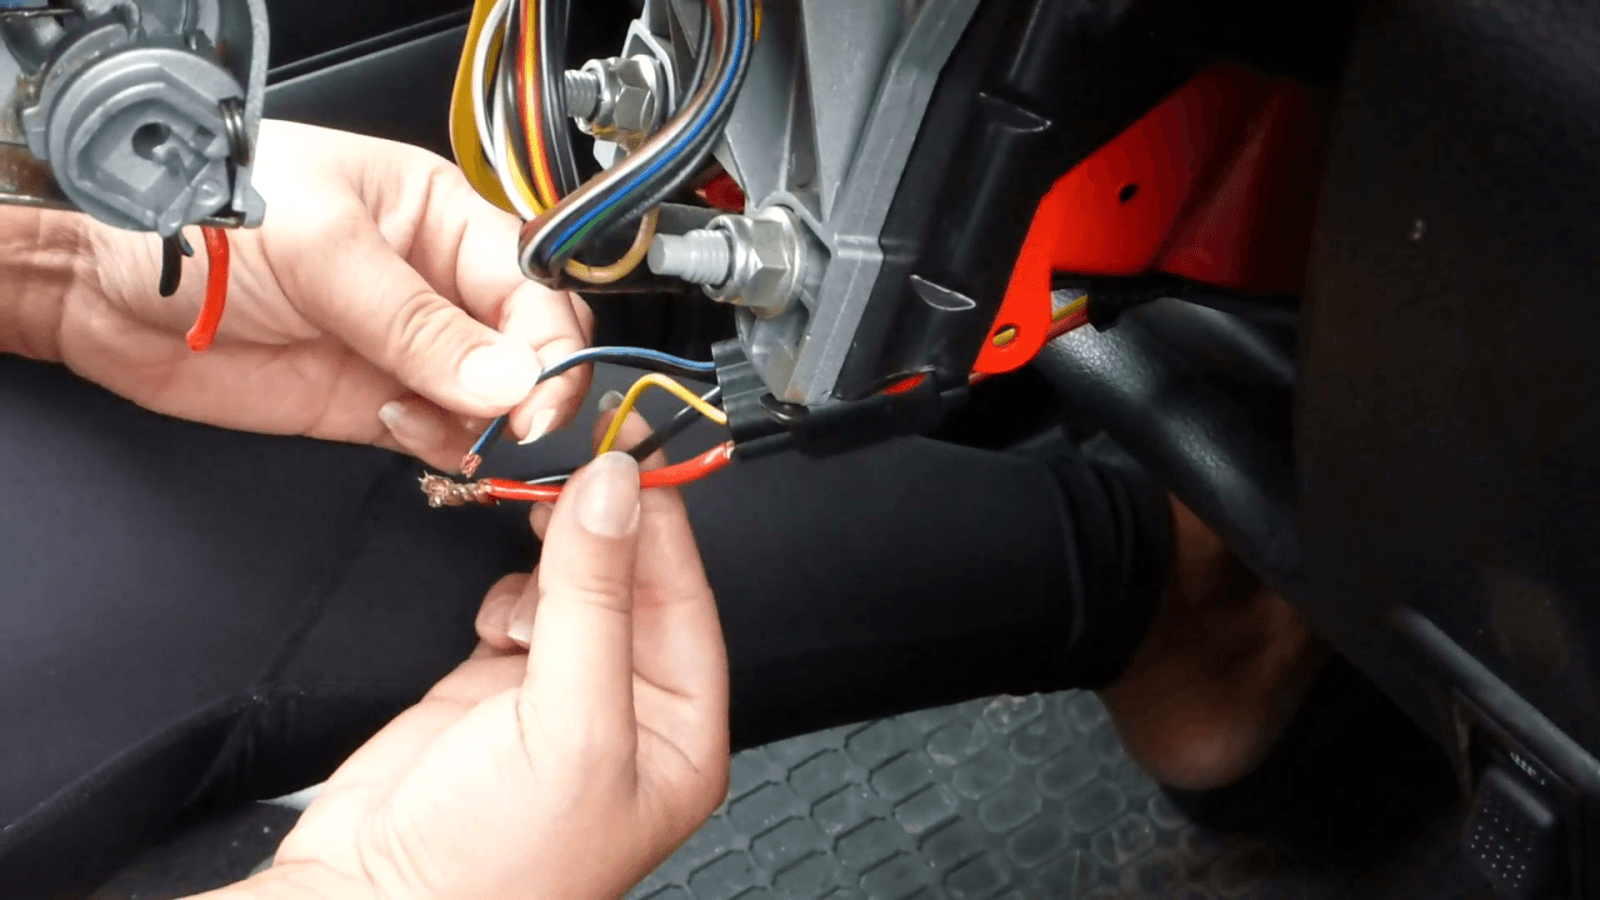 How to Start a Car without a Key or Hot Wiring